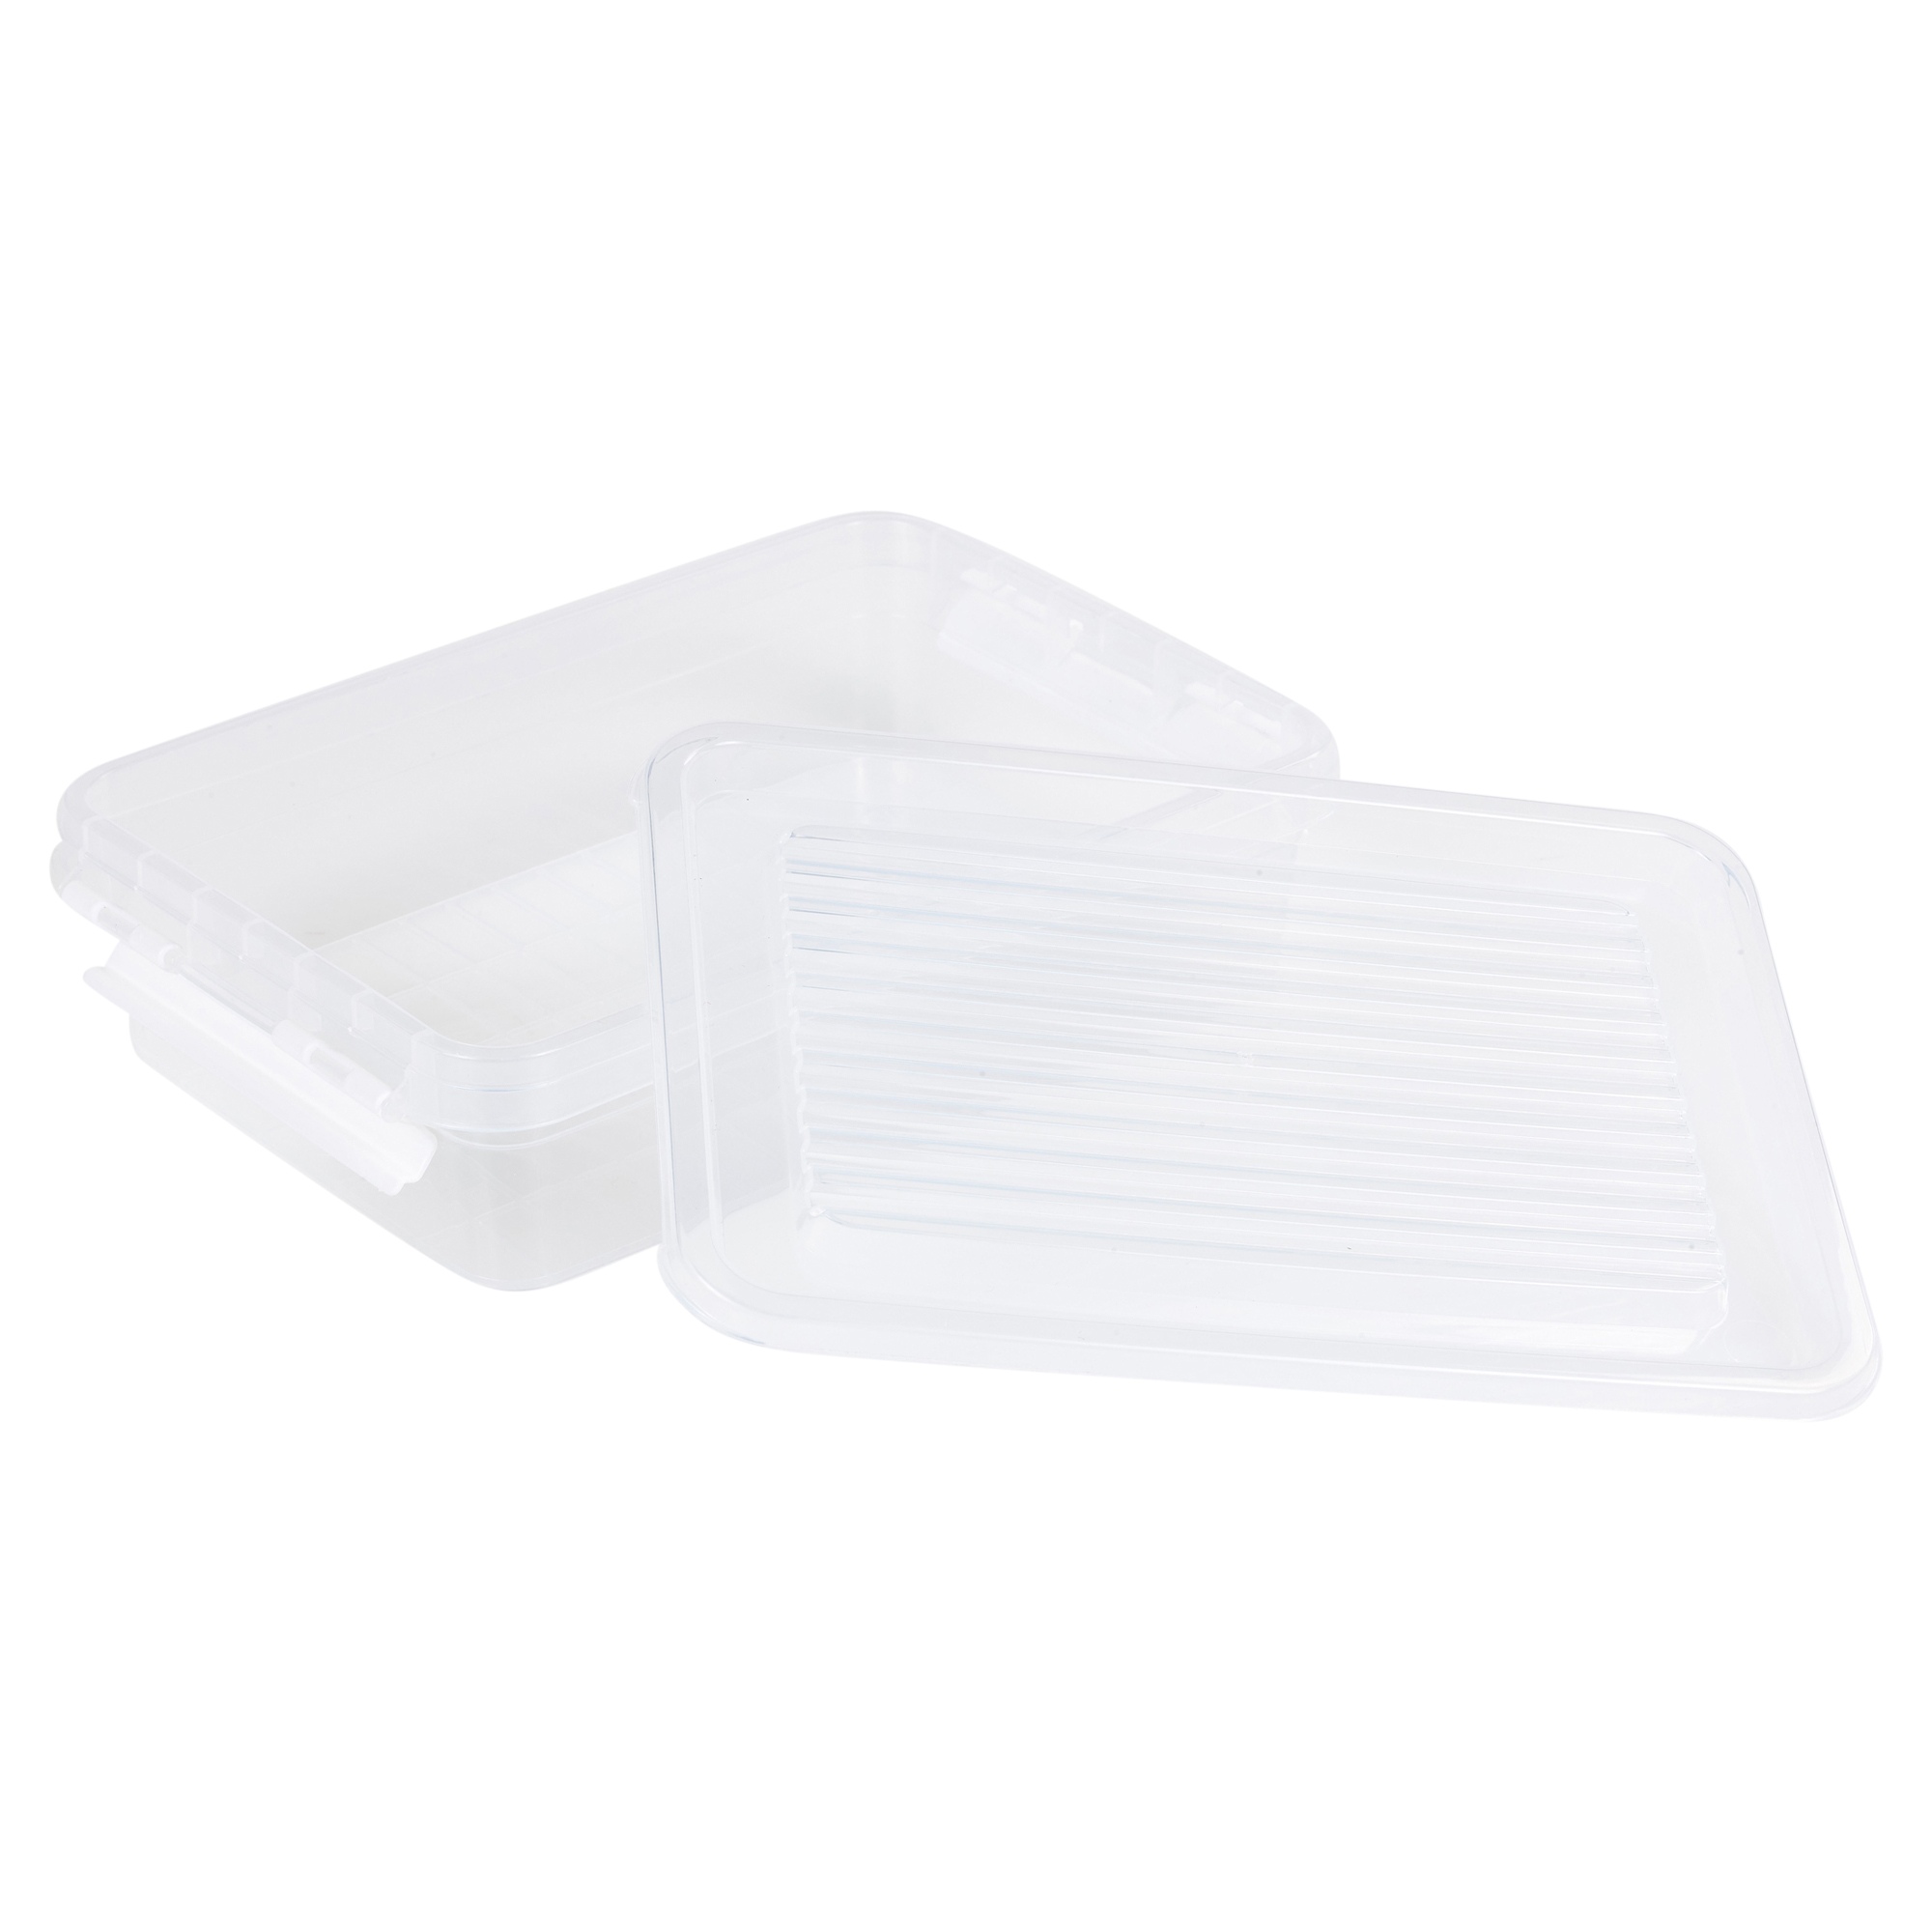 4x 1800ml White Food Storage Boxes Crates Containers with Clip On Lids